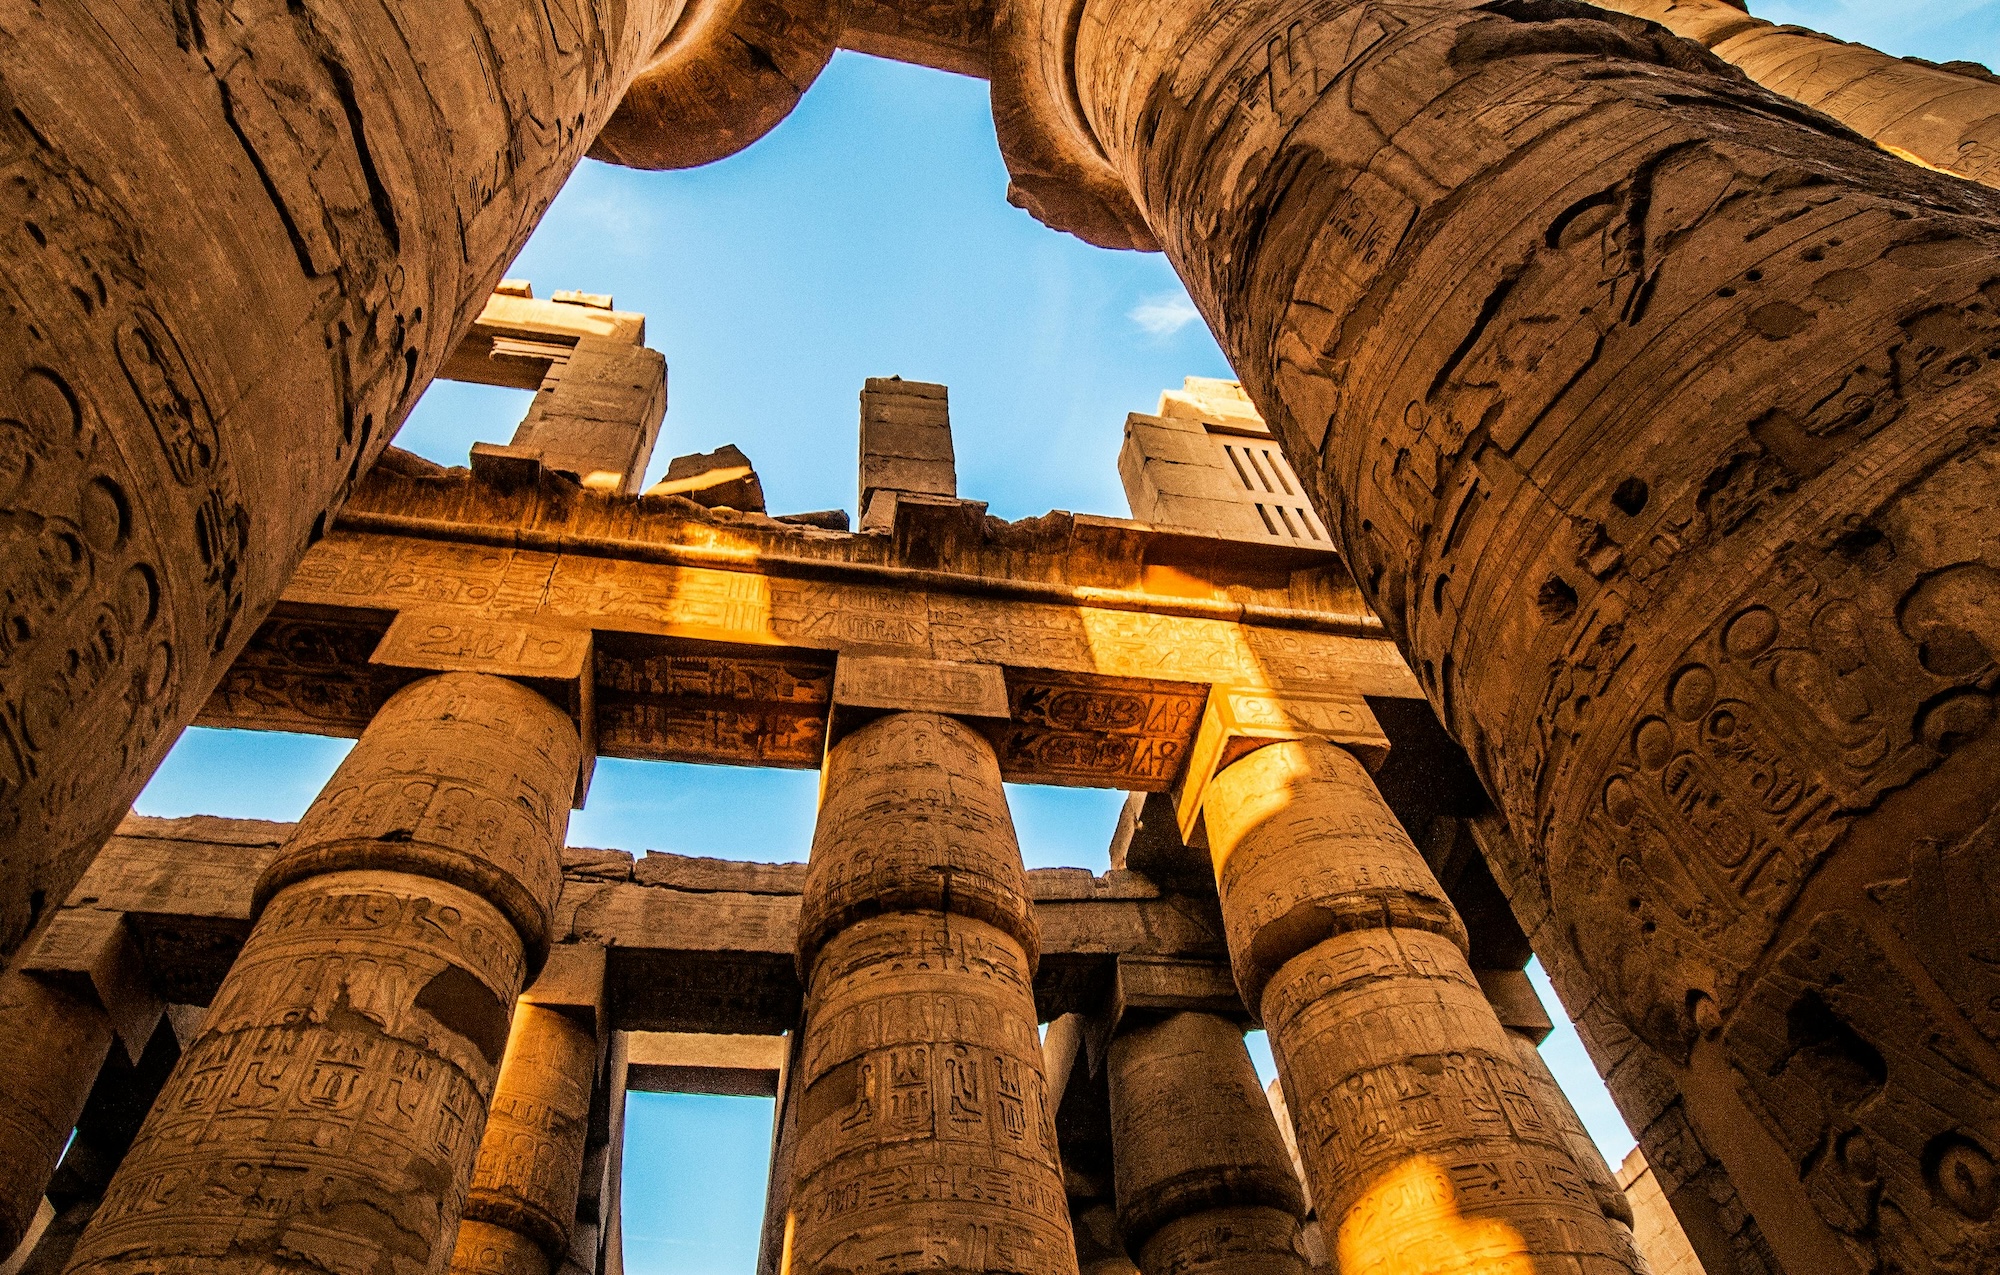 Egypt Achieves Tourism Records: The Accomplishments of a Visionary Path